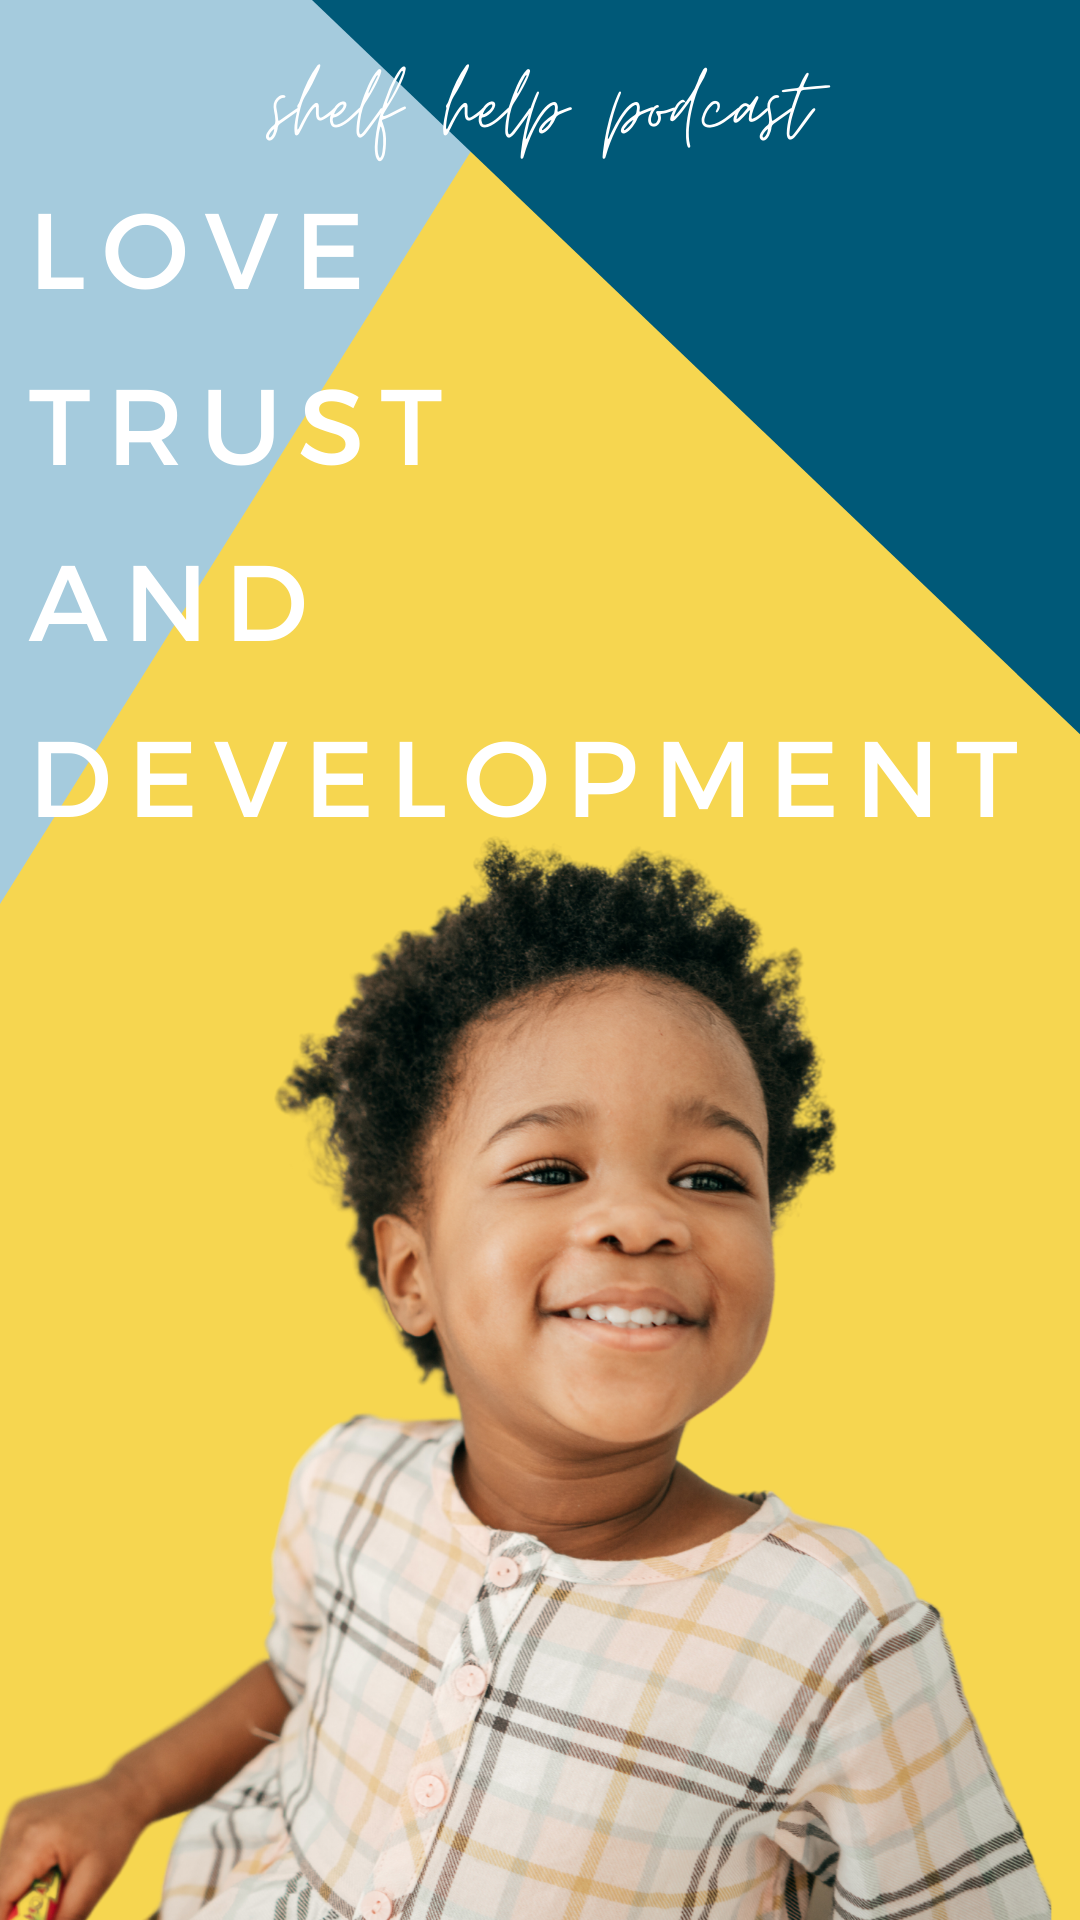 Montessori parenting requires us to love and trust our child's development in challenging ways. In this Montessori parenting podcast we discuss the challenges and success we face around trust and discipline.